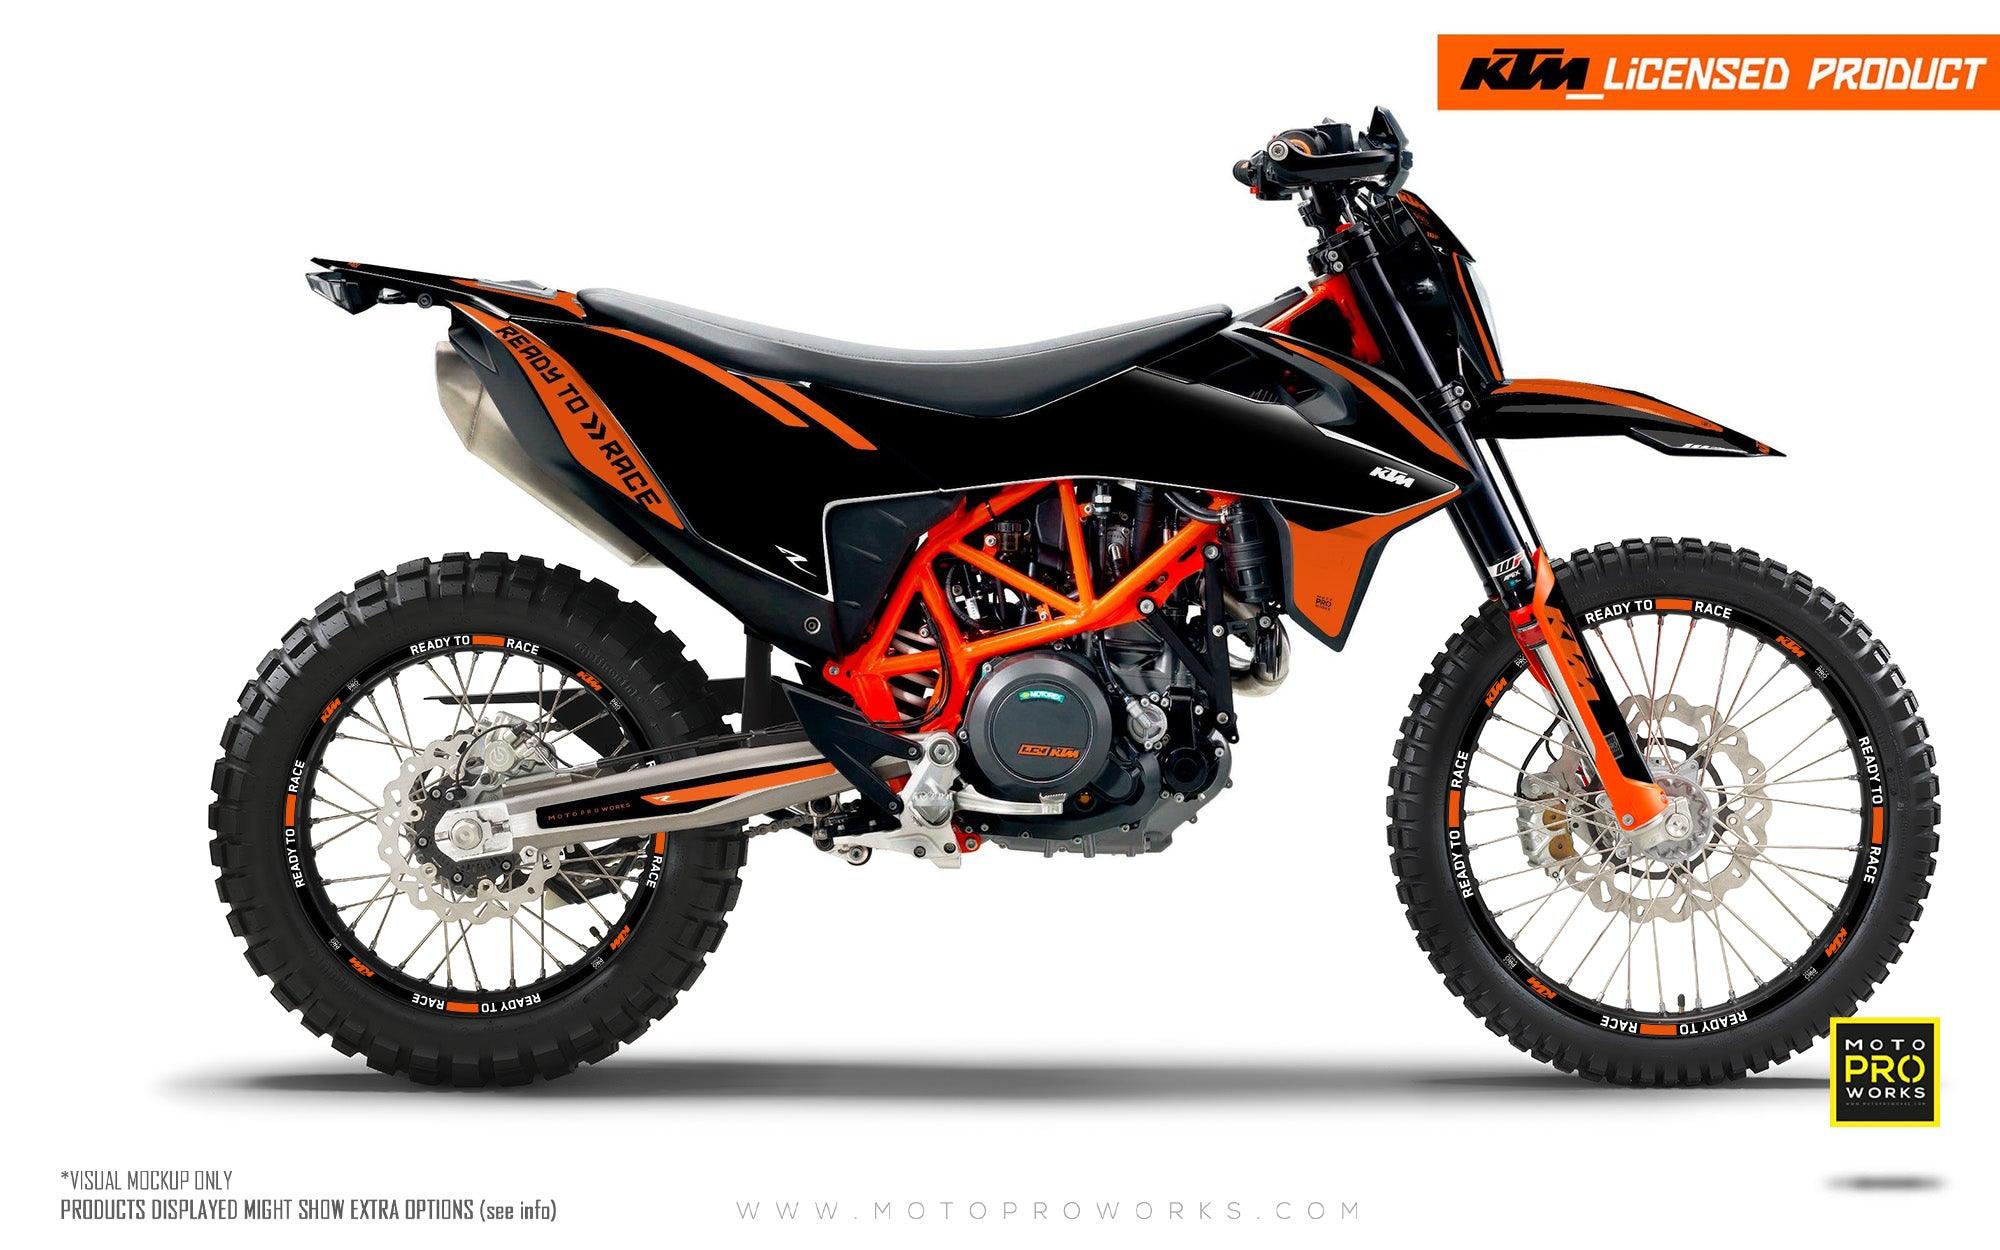 KTM GRAPHIC KIT - "Trac" (black) - MotoProWorks | Decals and Bike Graphic kit